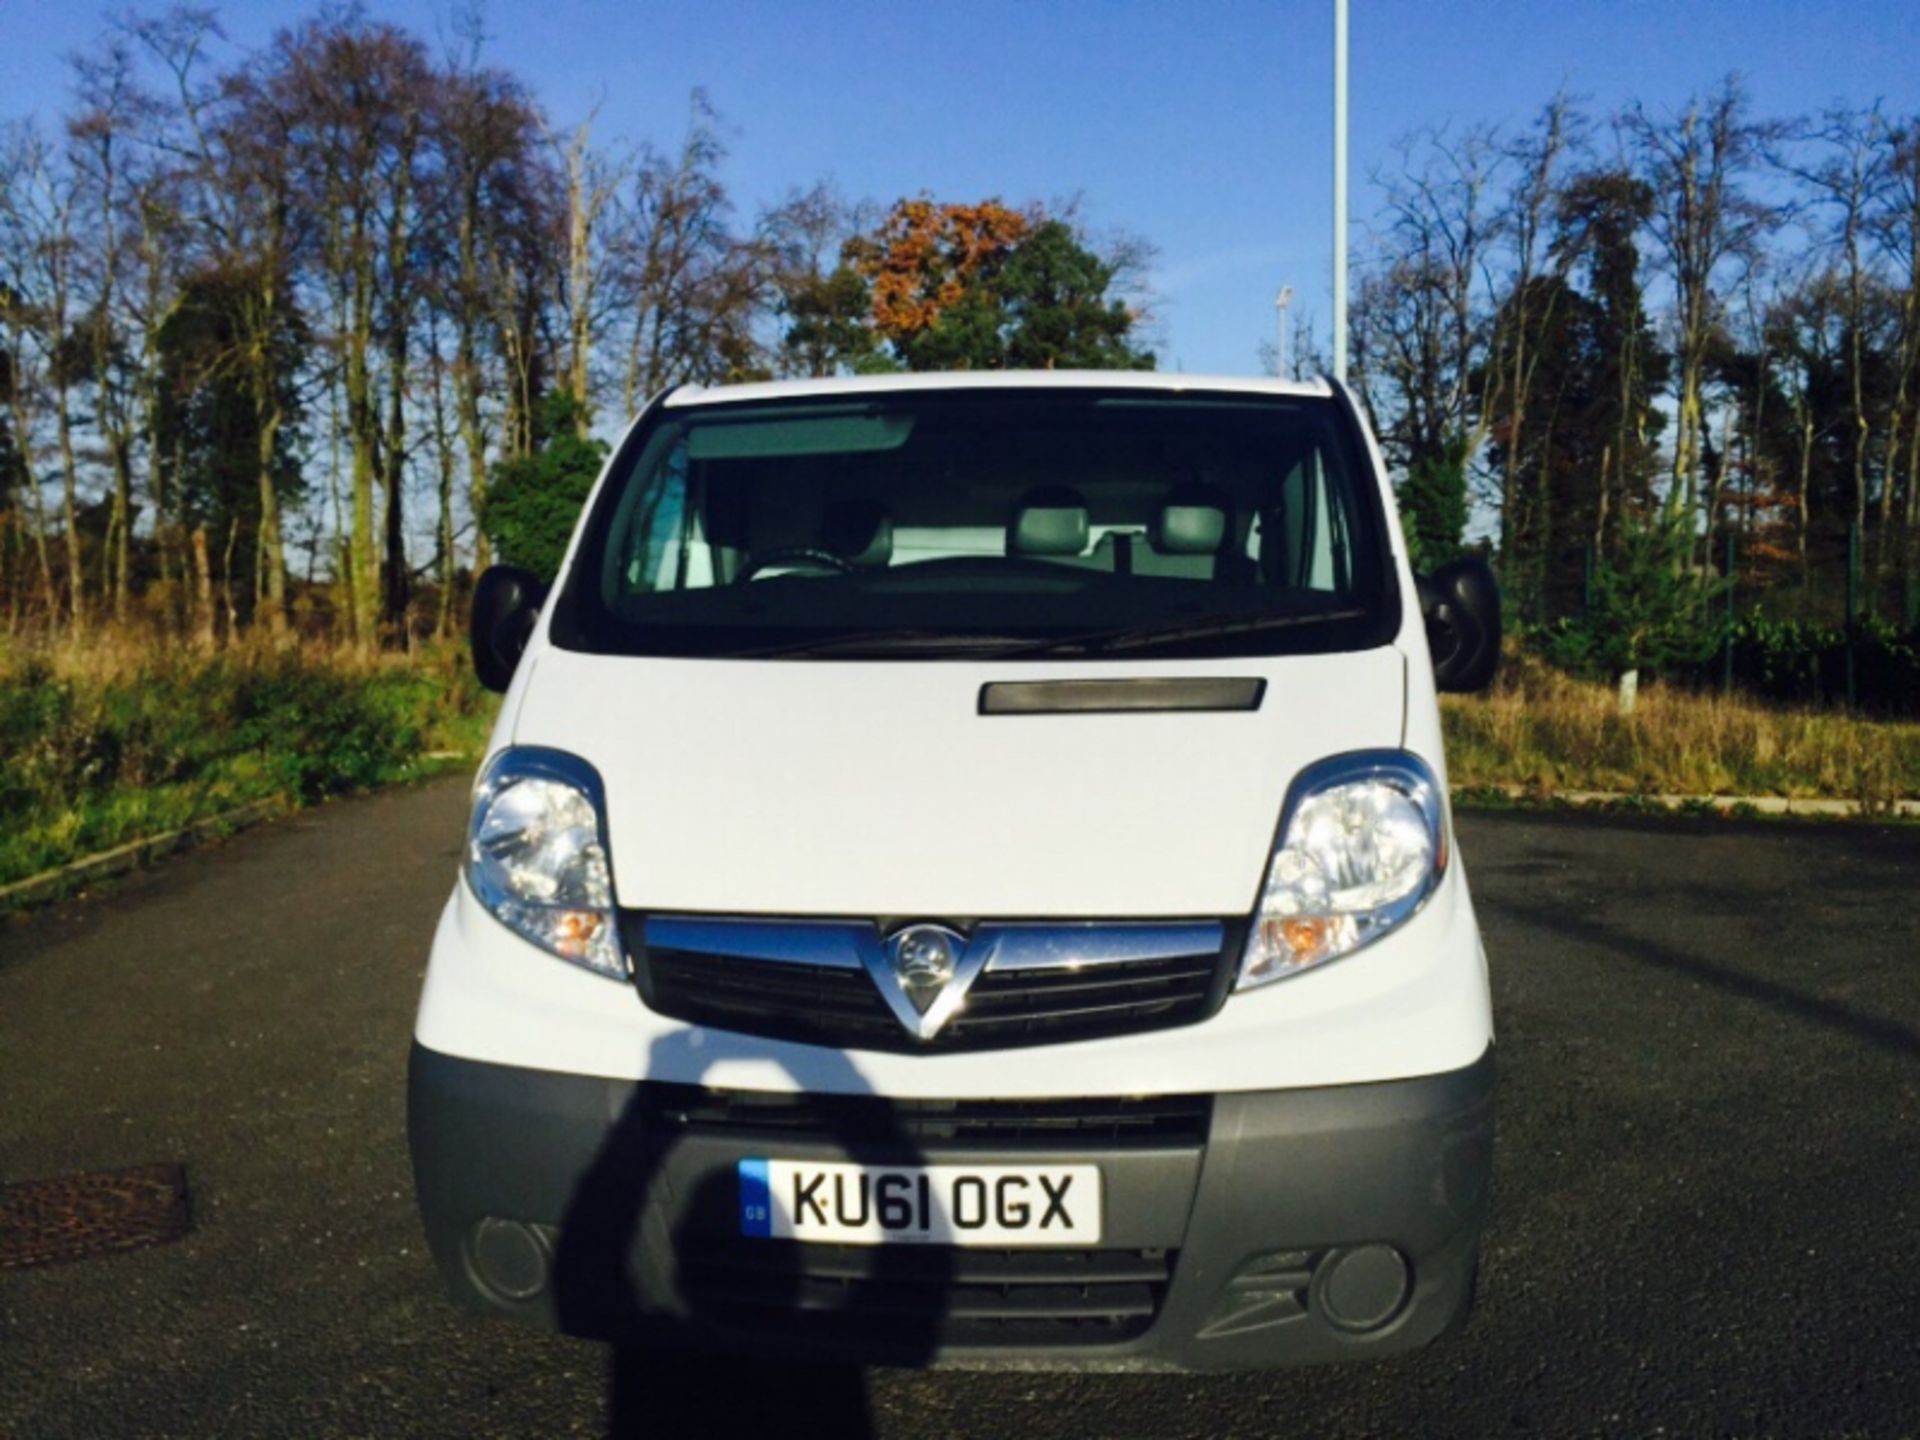 VAUXHALL VIVARO 2.0CDTI - 2012 MODEL - ELECTRIC PACK - 1 OWNER FROM NEW - FULL SERVICE HISTORY!!!! - Image 3 of 9